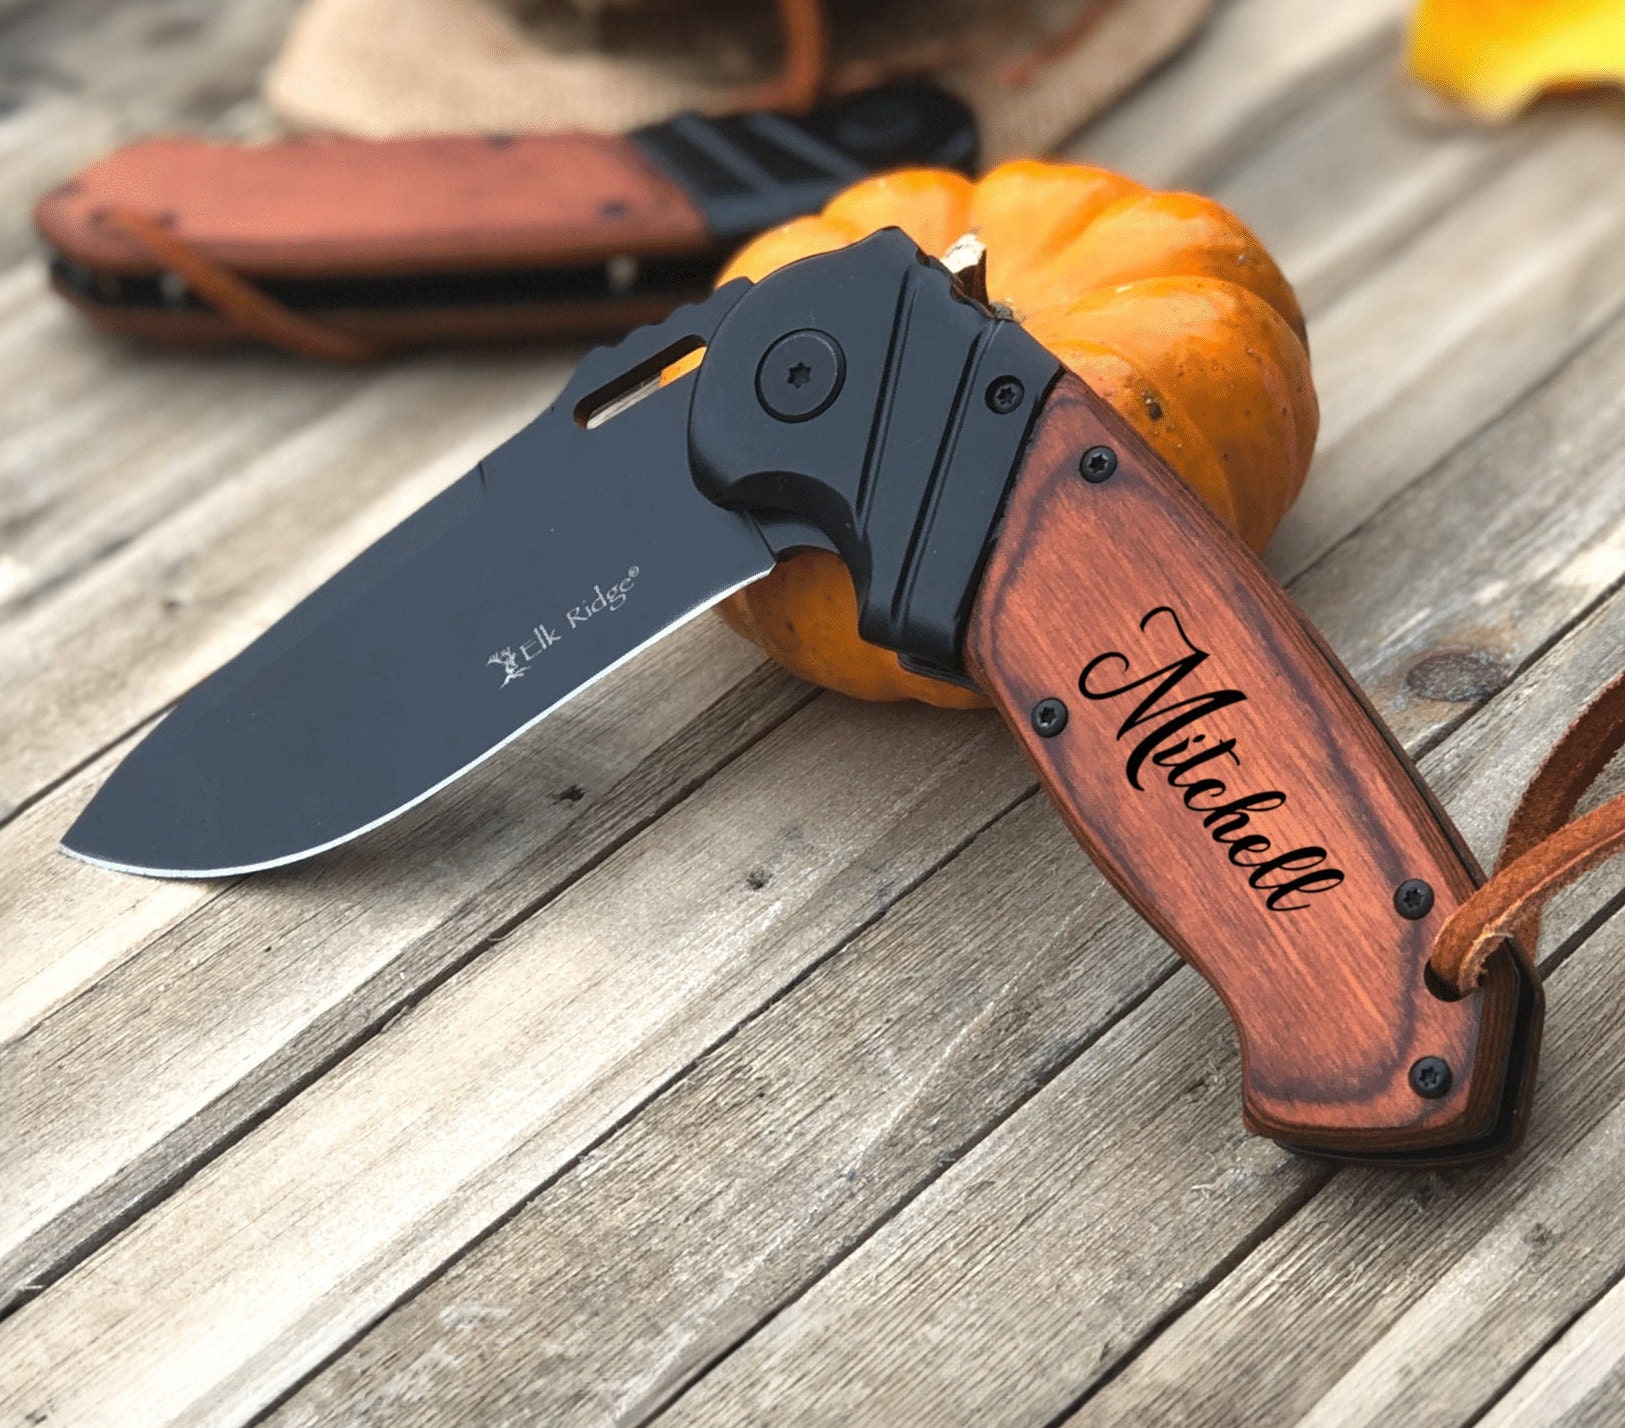  Personalized Engraved Pocket Knife With Gift Box - Custom  Knifes For Husband, Boyfriend, Dad, Son, Brother, Uncle, Grandpa As  Birthday, Anniversary, Father's Day, Christmas Gifts : Tools & Home  Improvement